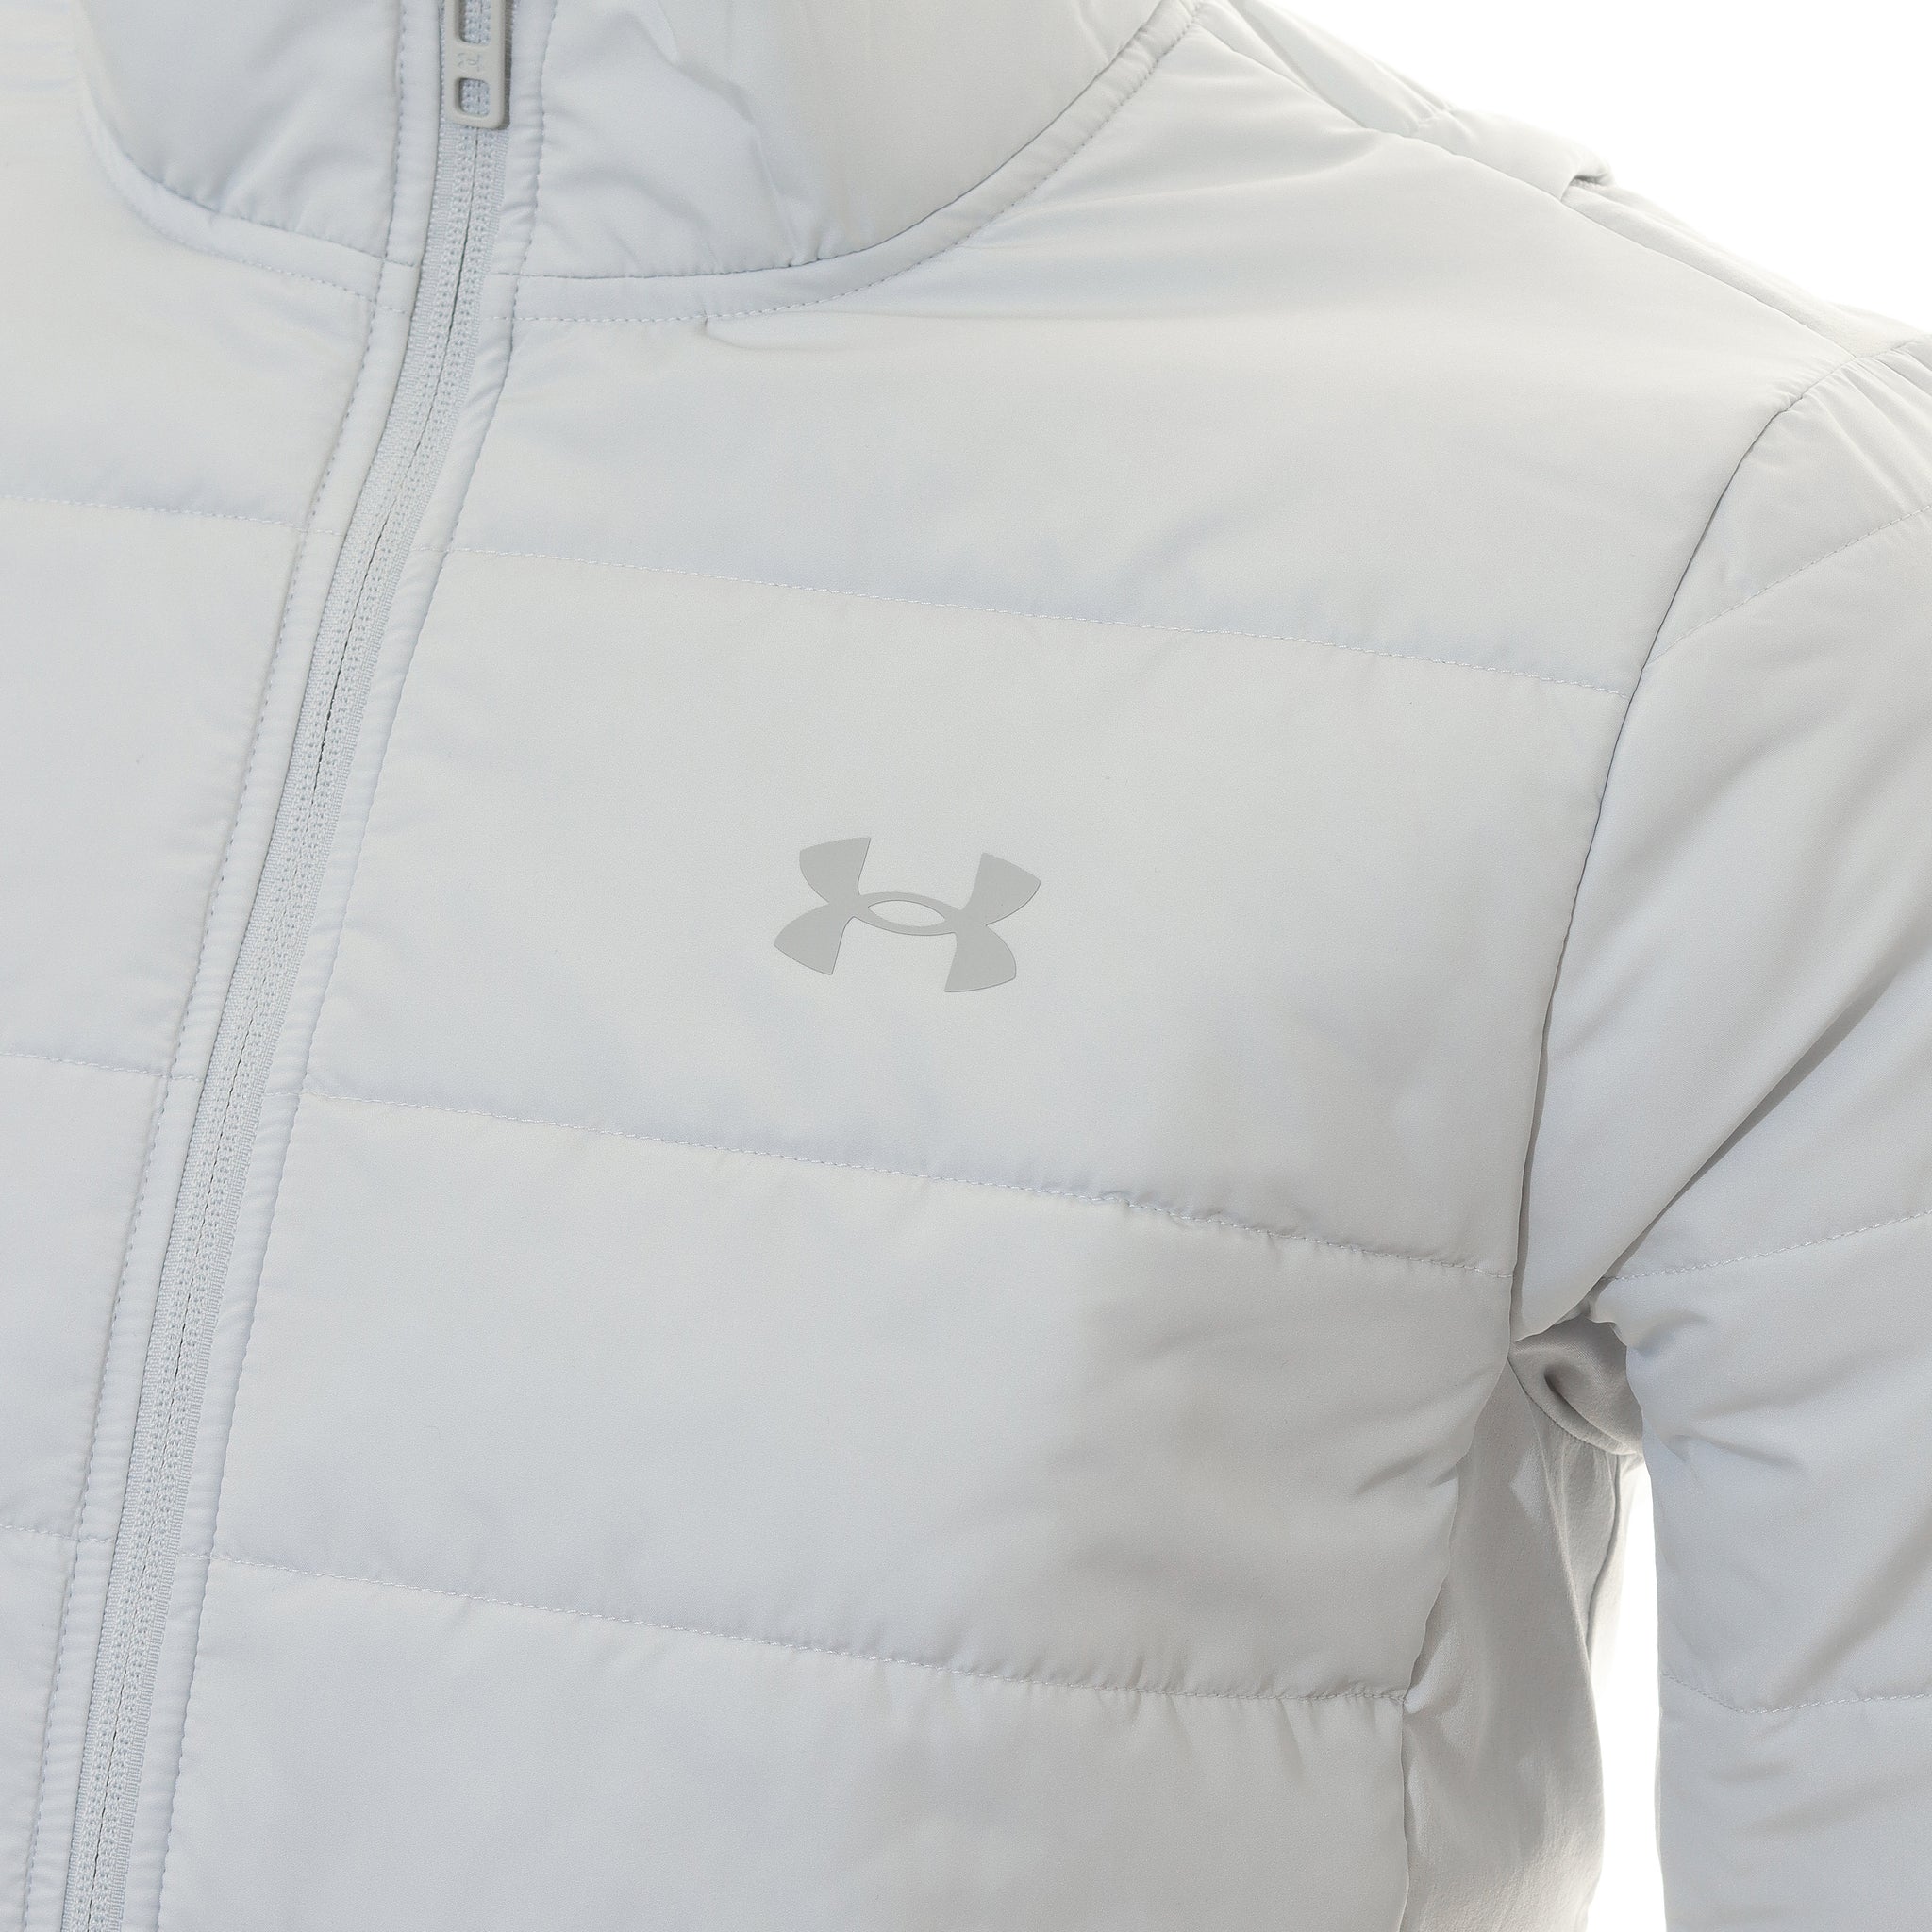 under-armour-golf-storm-session-jacket-1378057-halo-grey-014